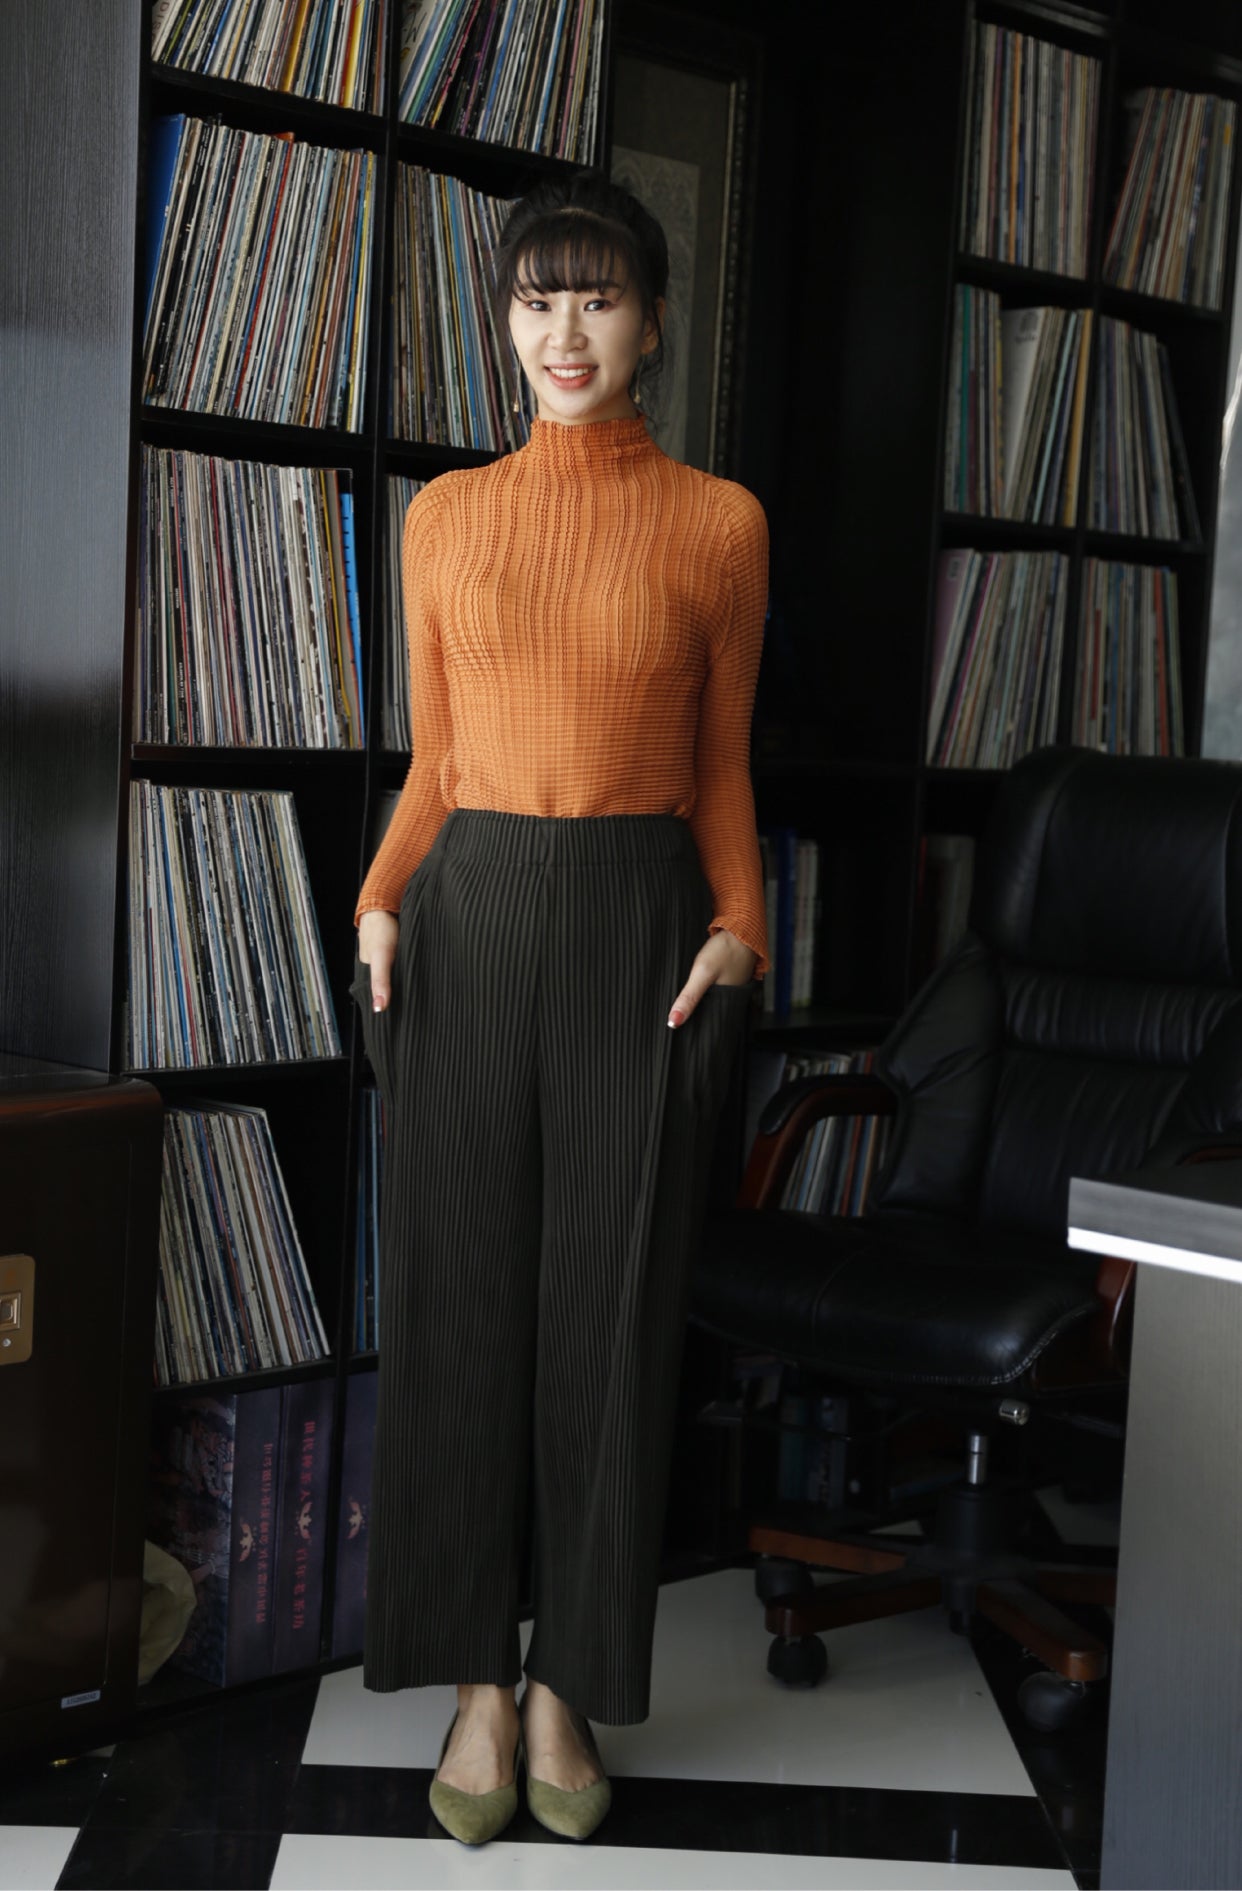 Pleated long sleeve high-neck top